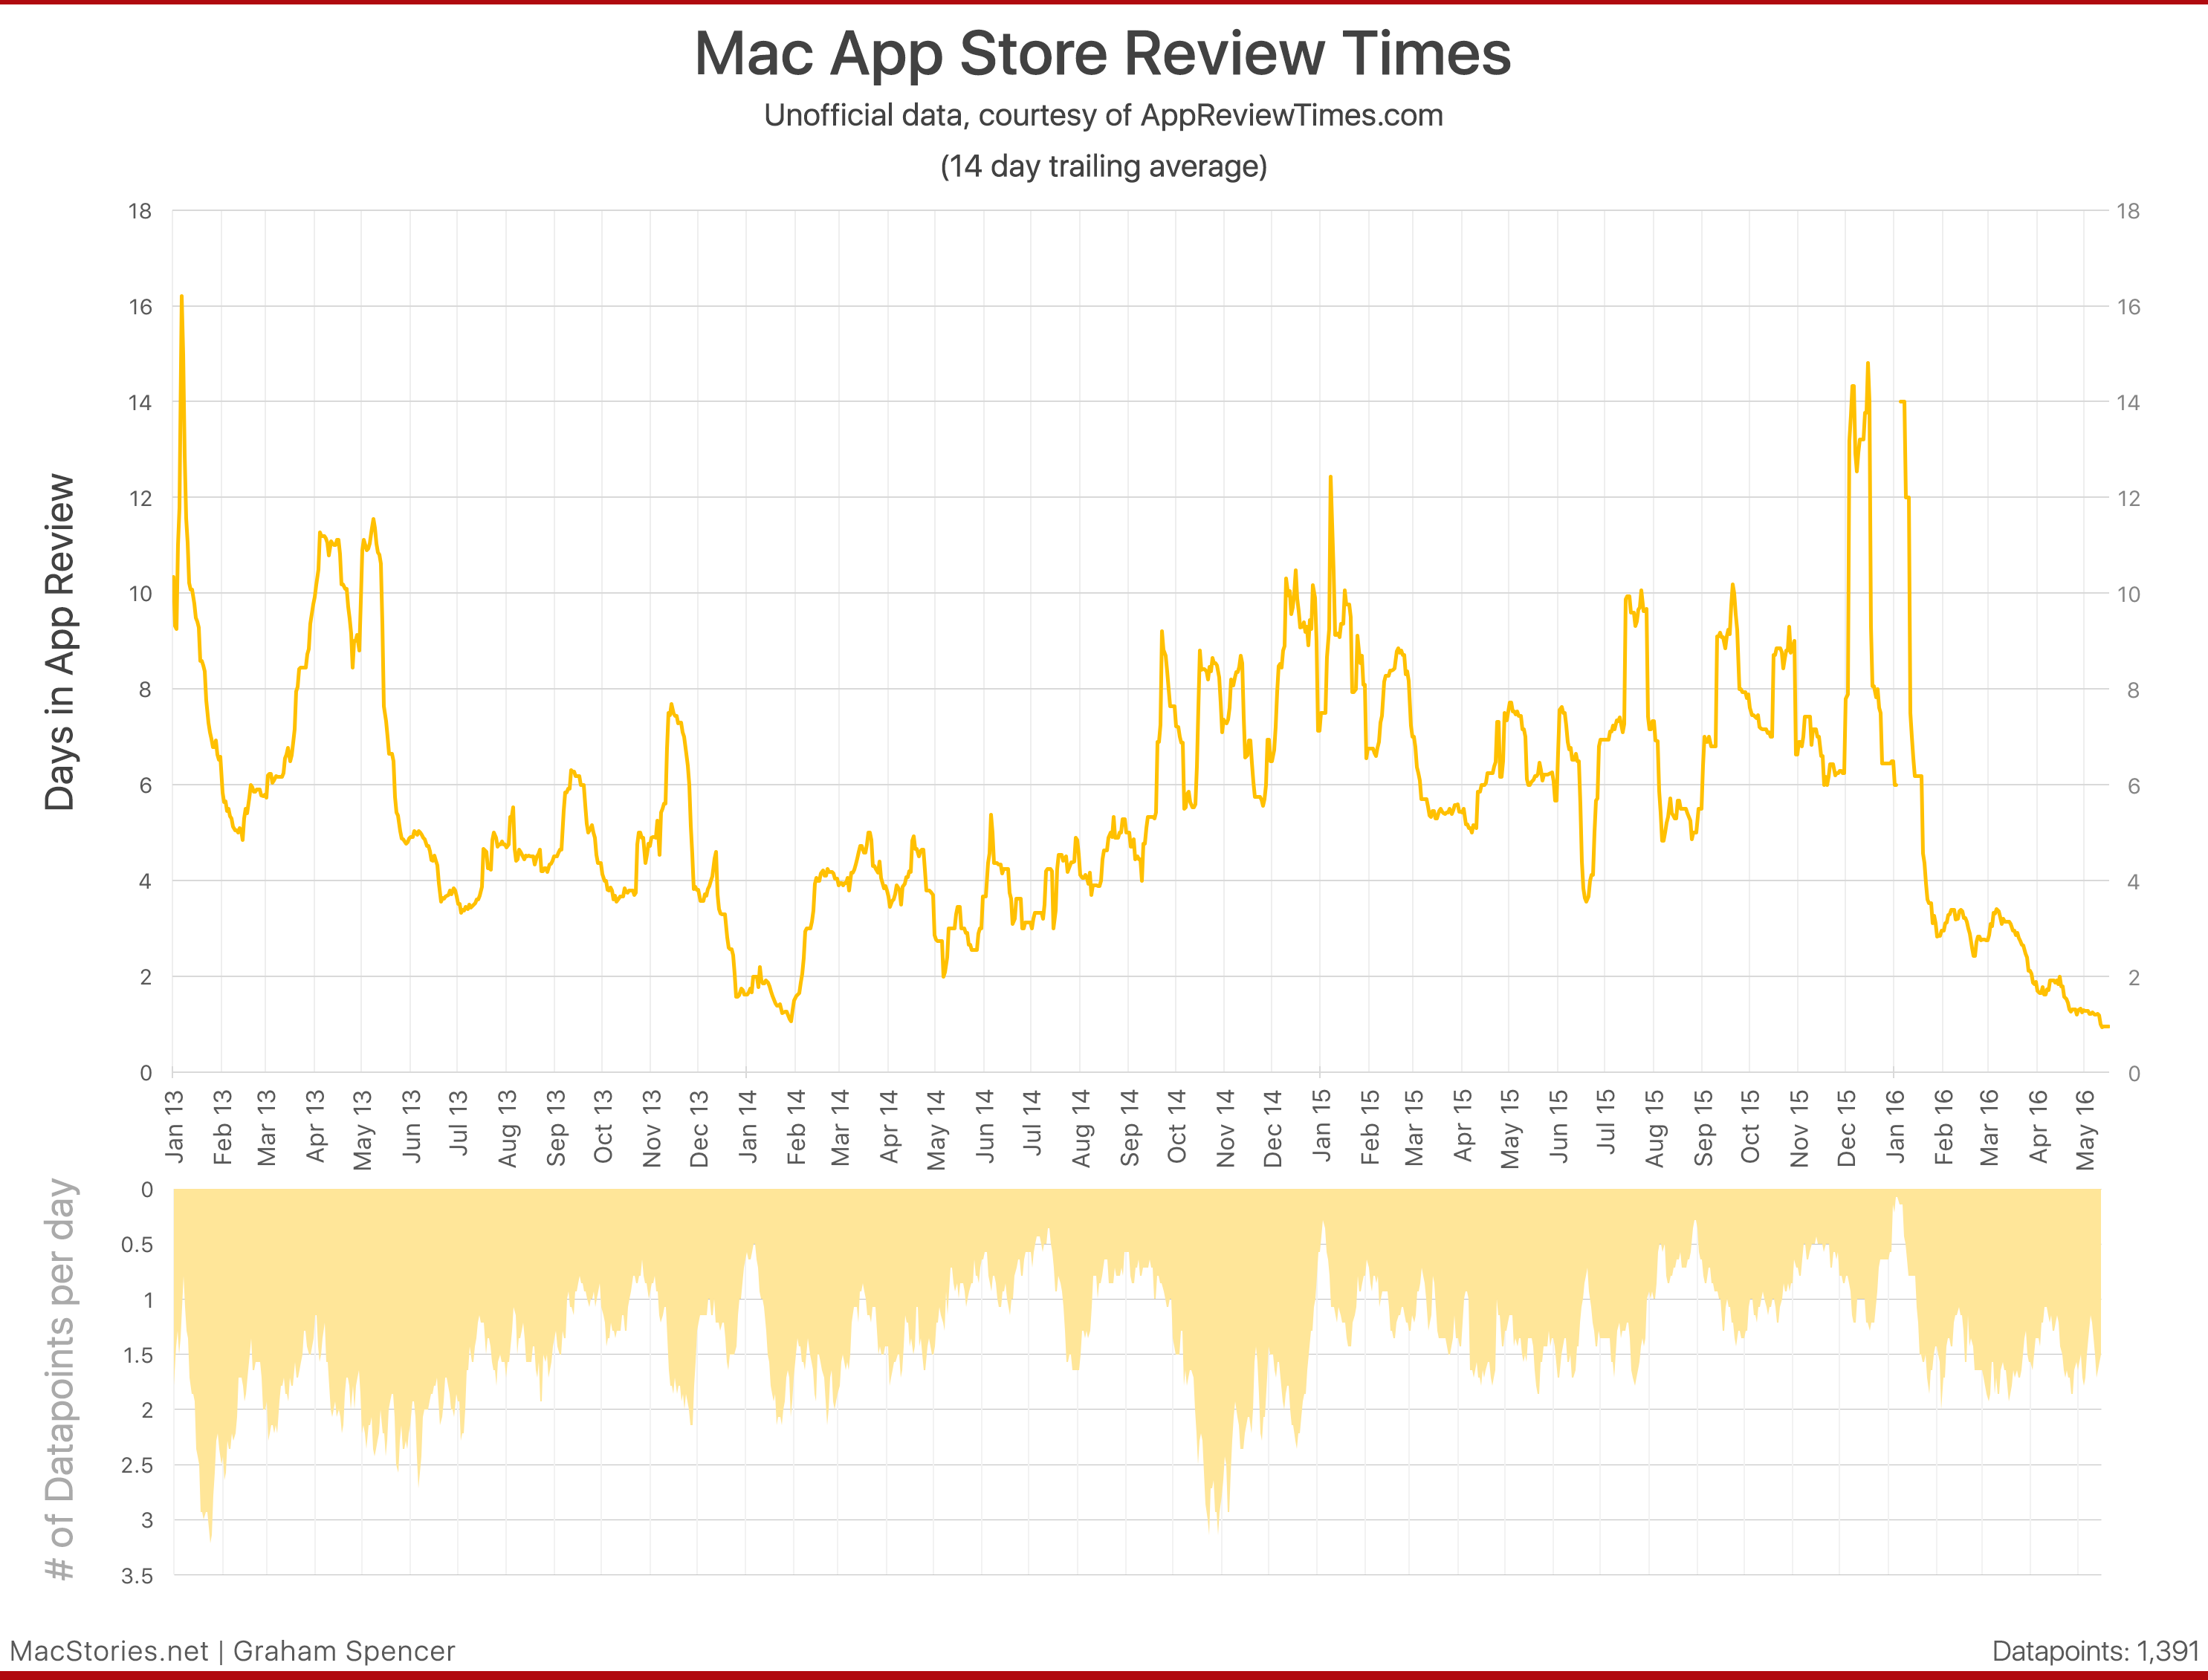 Data courtesy of AppReviewTimes.com